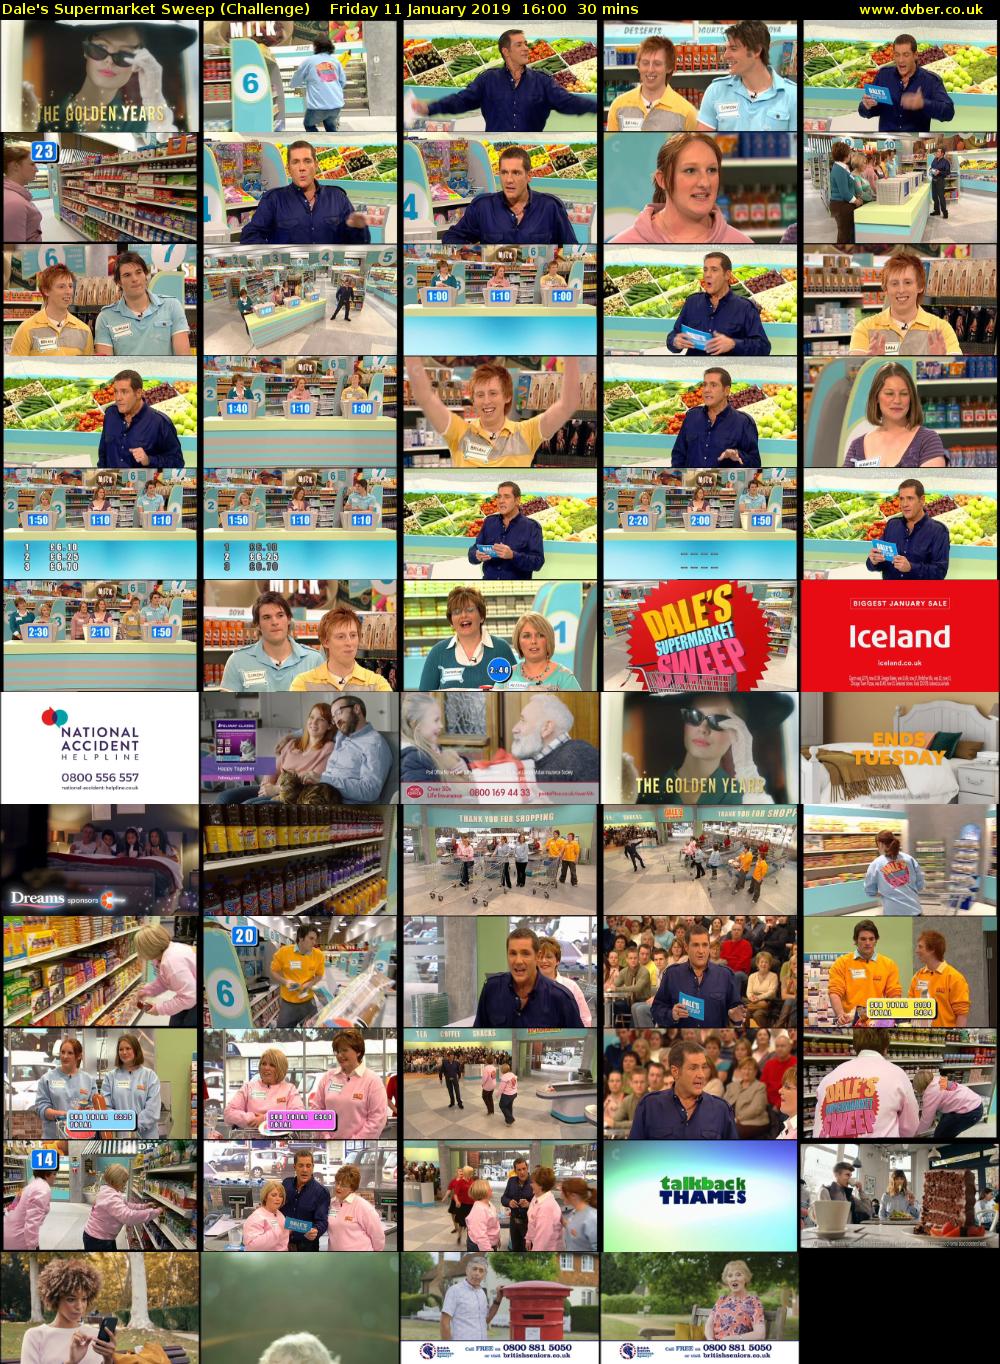 Dale's Supermarket Sweep (Challenge) Friday 11 January 2019 16:00 - 16:30